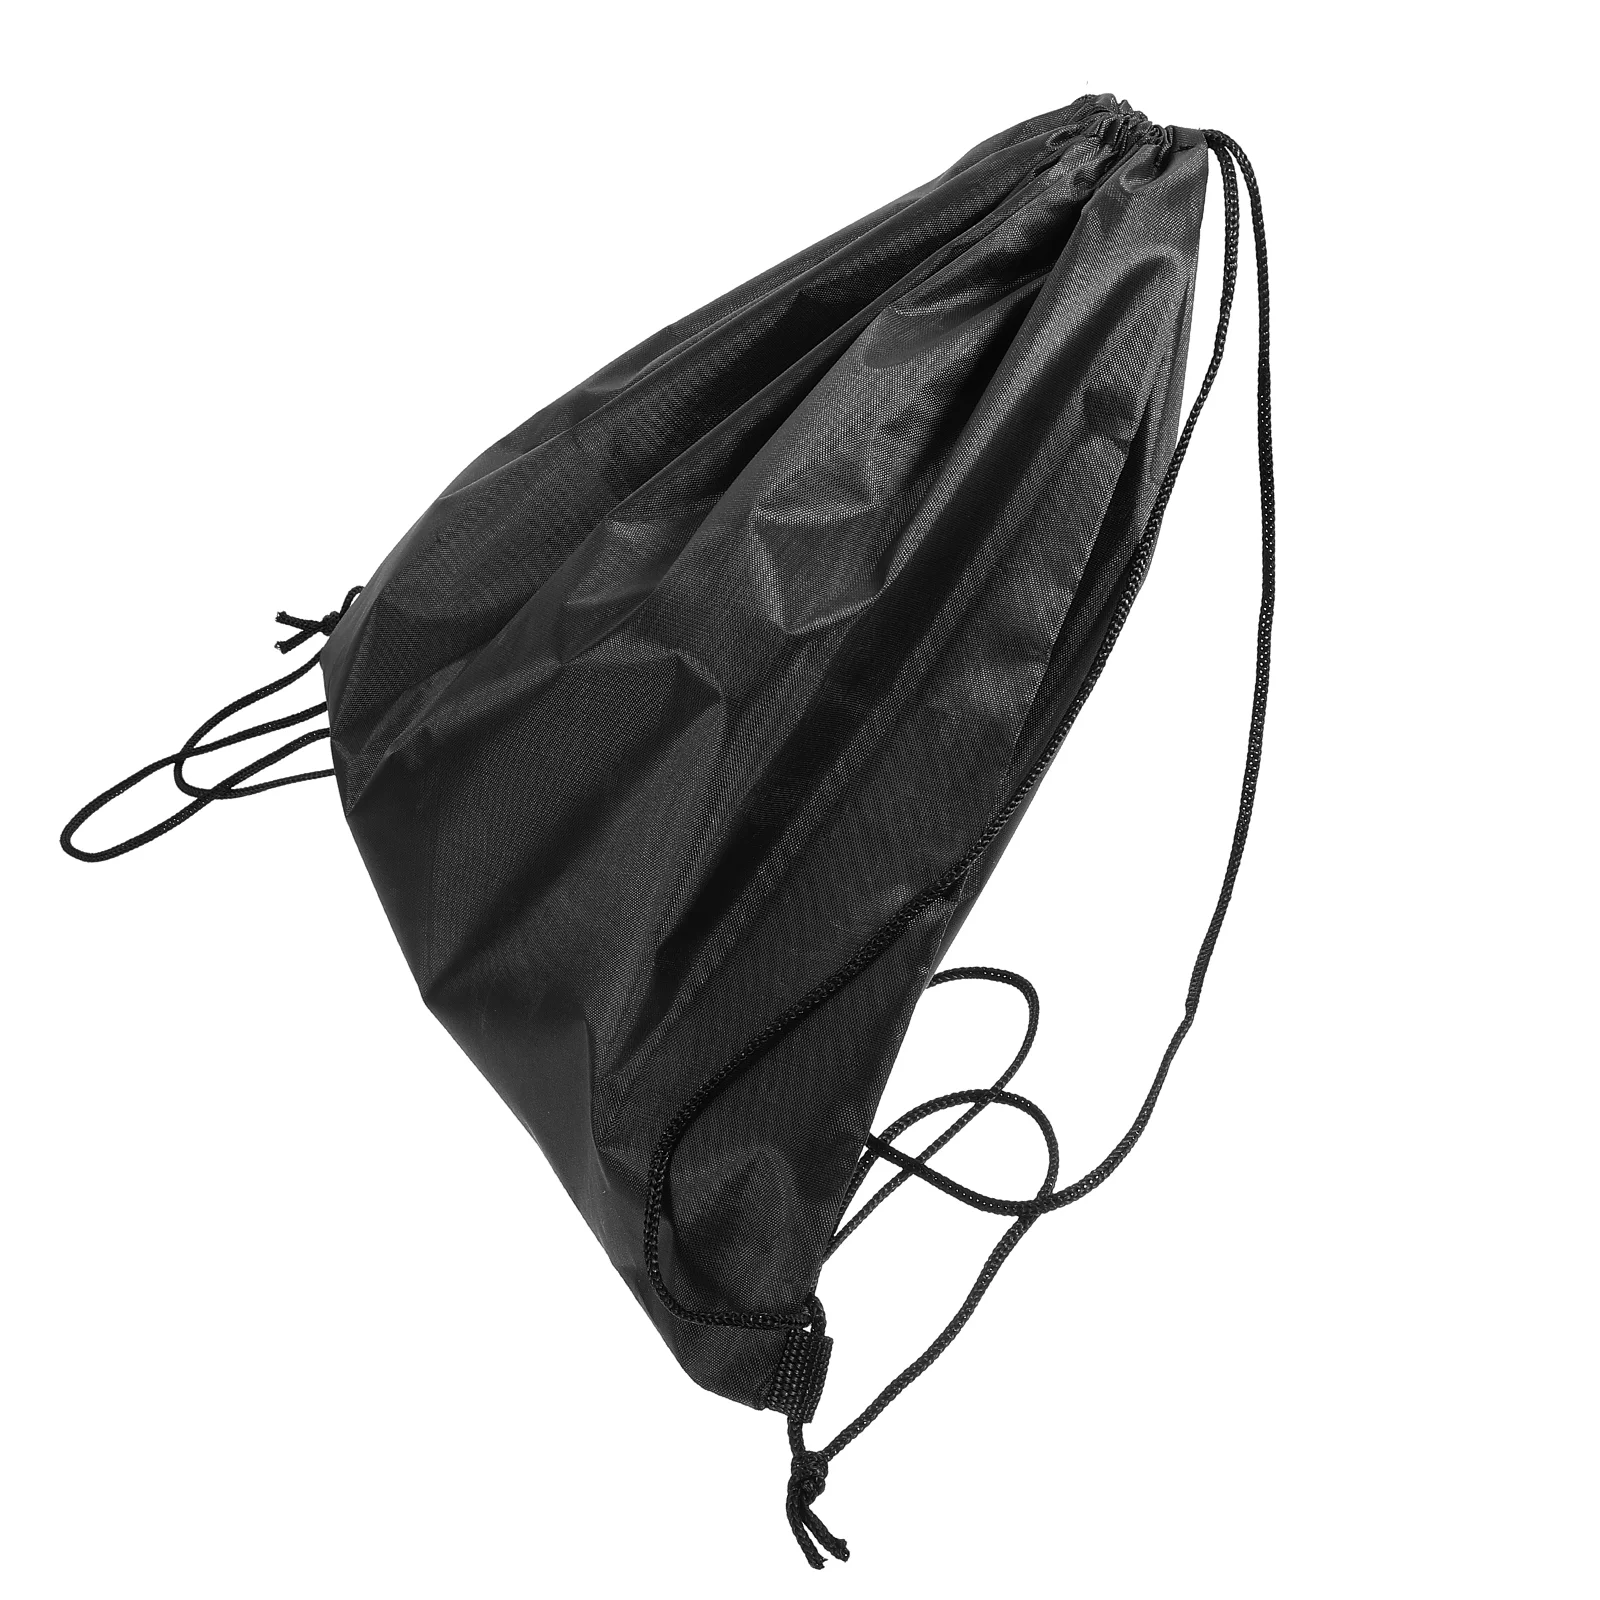 Portable Bag Drawstring Pouch Outdoor Motorcycle Storage Bag 2022 new outdoor portable travel storage bag tactical edc tool storage bag wash bag medical kit first aid kit 1